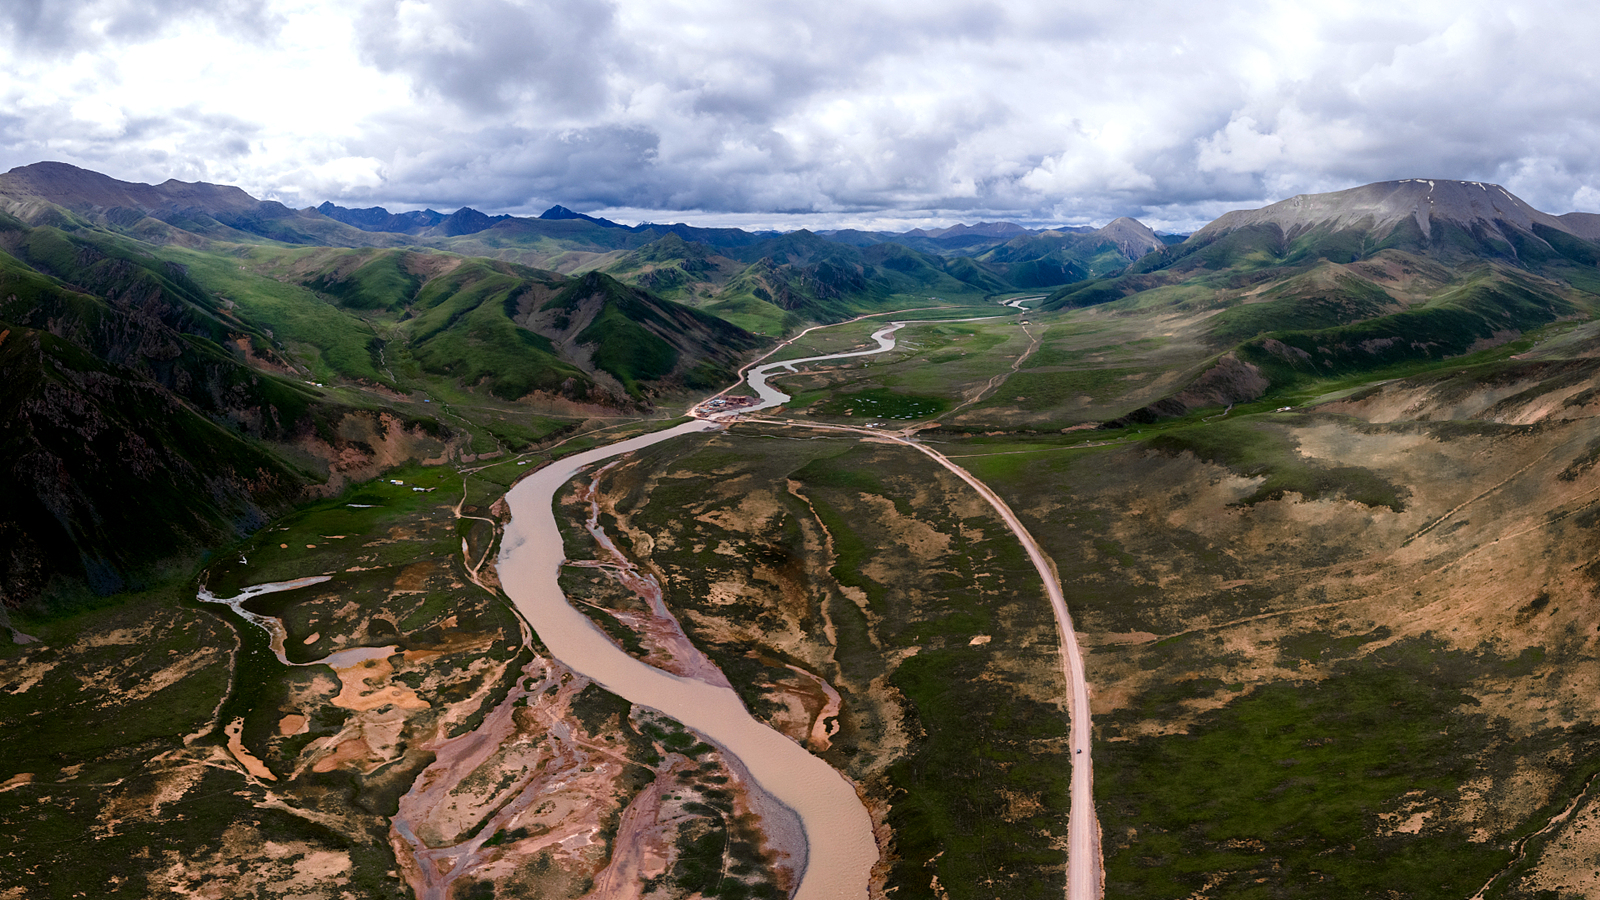 The Zachu River, headwater of the Lancang River in the Sanjiangyuan area, where the Yangtze, Yellow and Lancang rivers originate, Qinghai Province, northwest China. /CFP